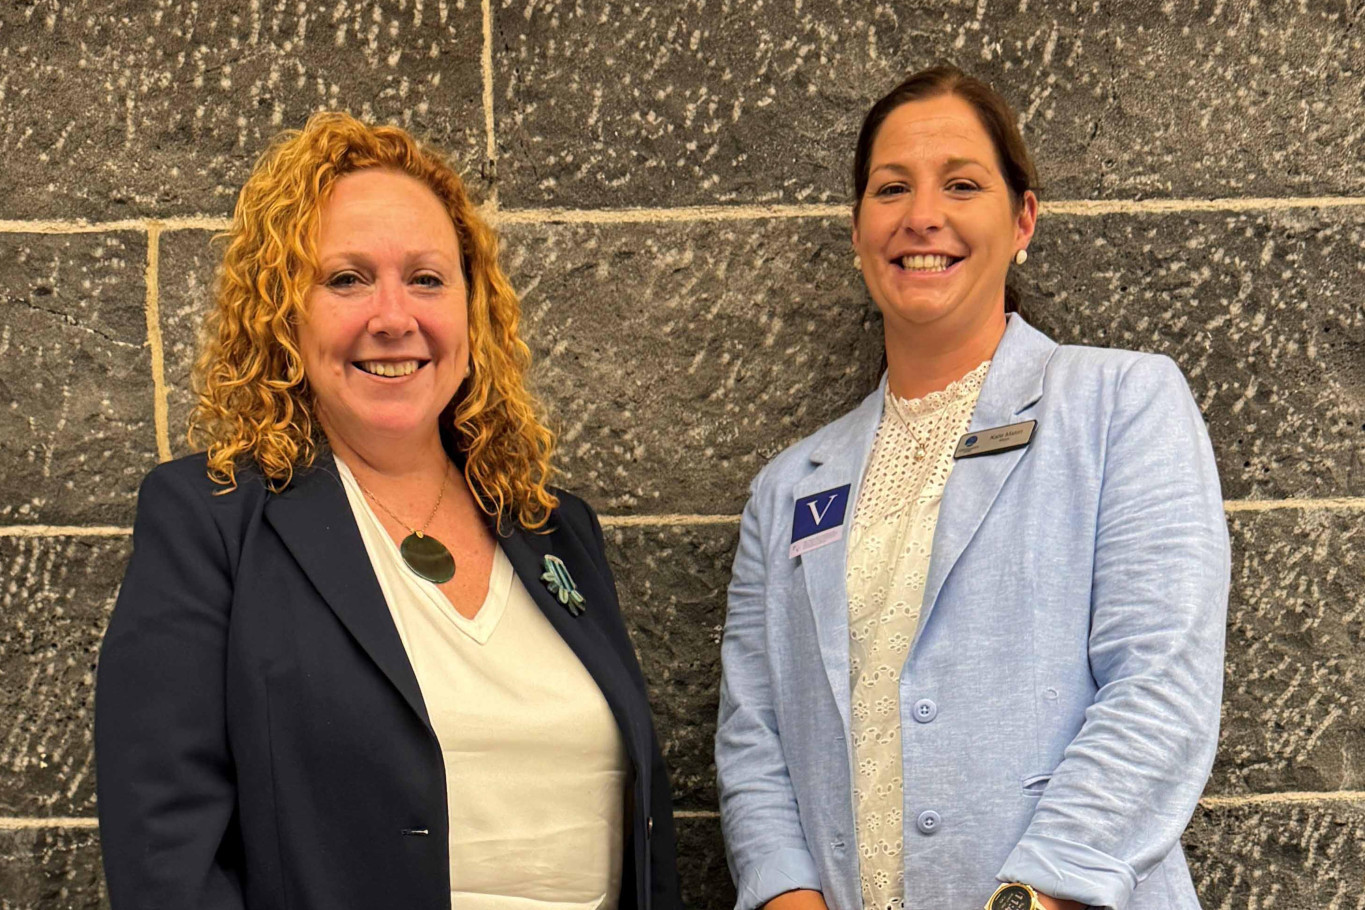 Pushing for change: Corangamite Shire mayor Kate Makin met with Minister for Local Government Melissa Horne in Melbourne last week.